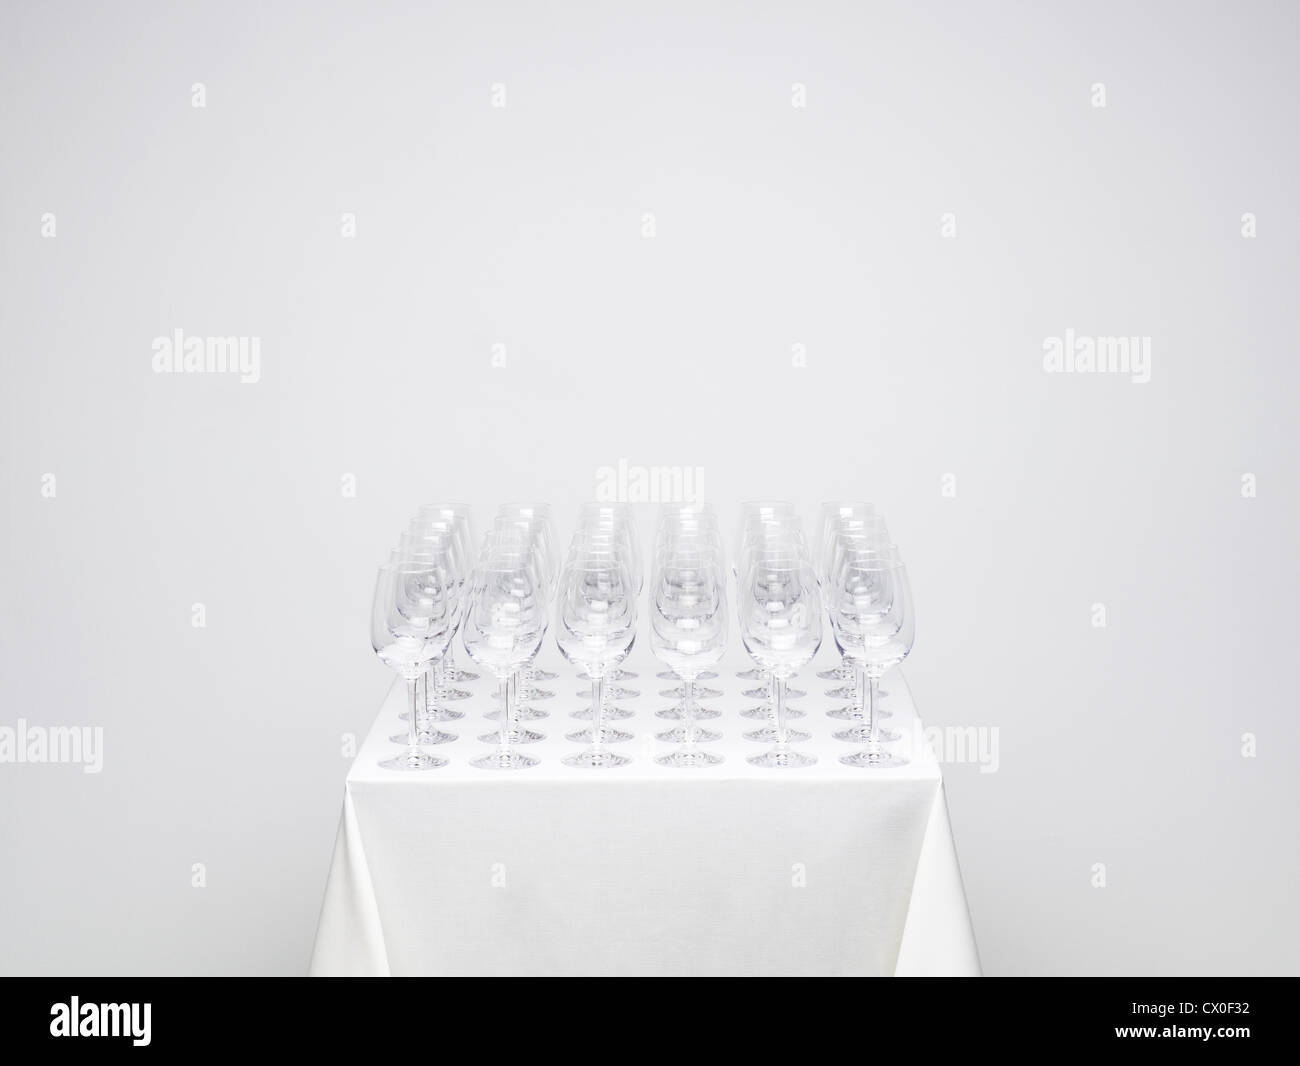 Rows of empty wine glasses on a table. Similar photo available with one glass full. Stock Photo